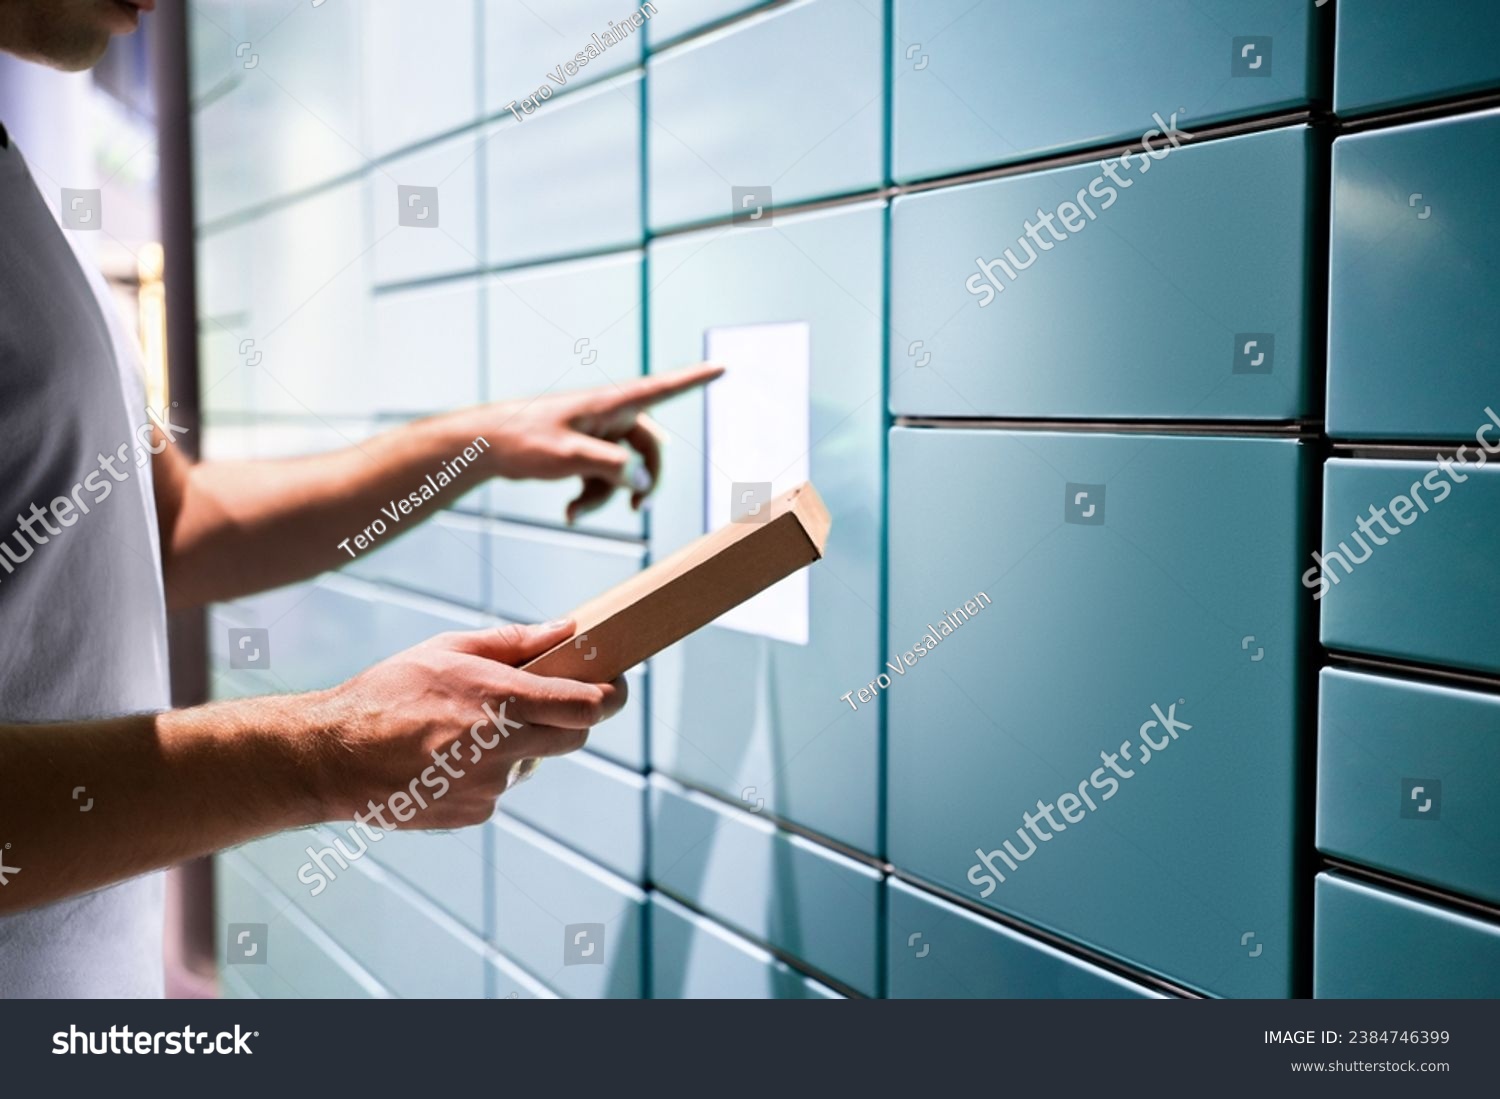 Locker parcel service. Package delivery to post mail box machine. Packet automat in postal office. Man using touchscreen. Pick up at storage. Collection at smart shipping terminal by customer. #2384746399